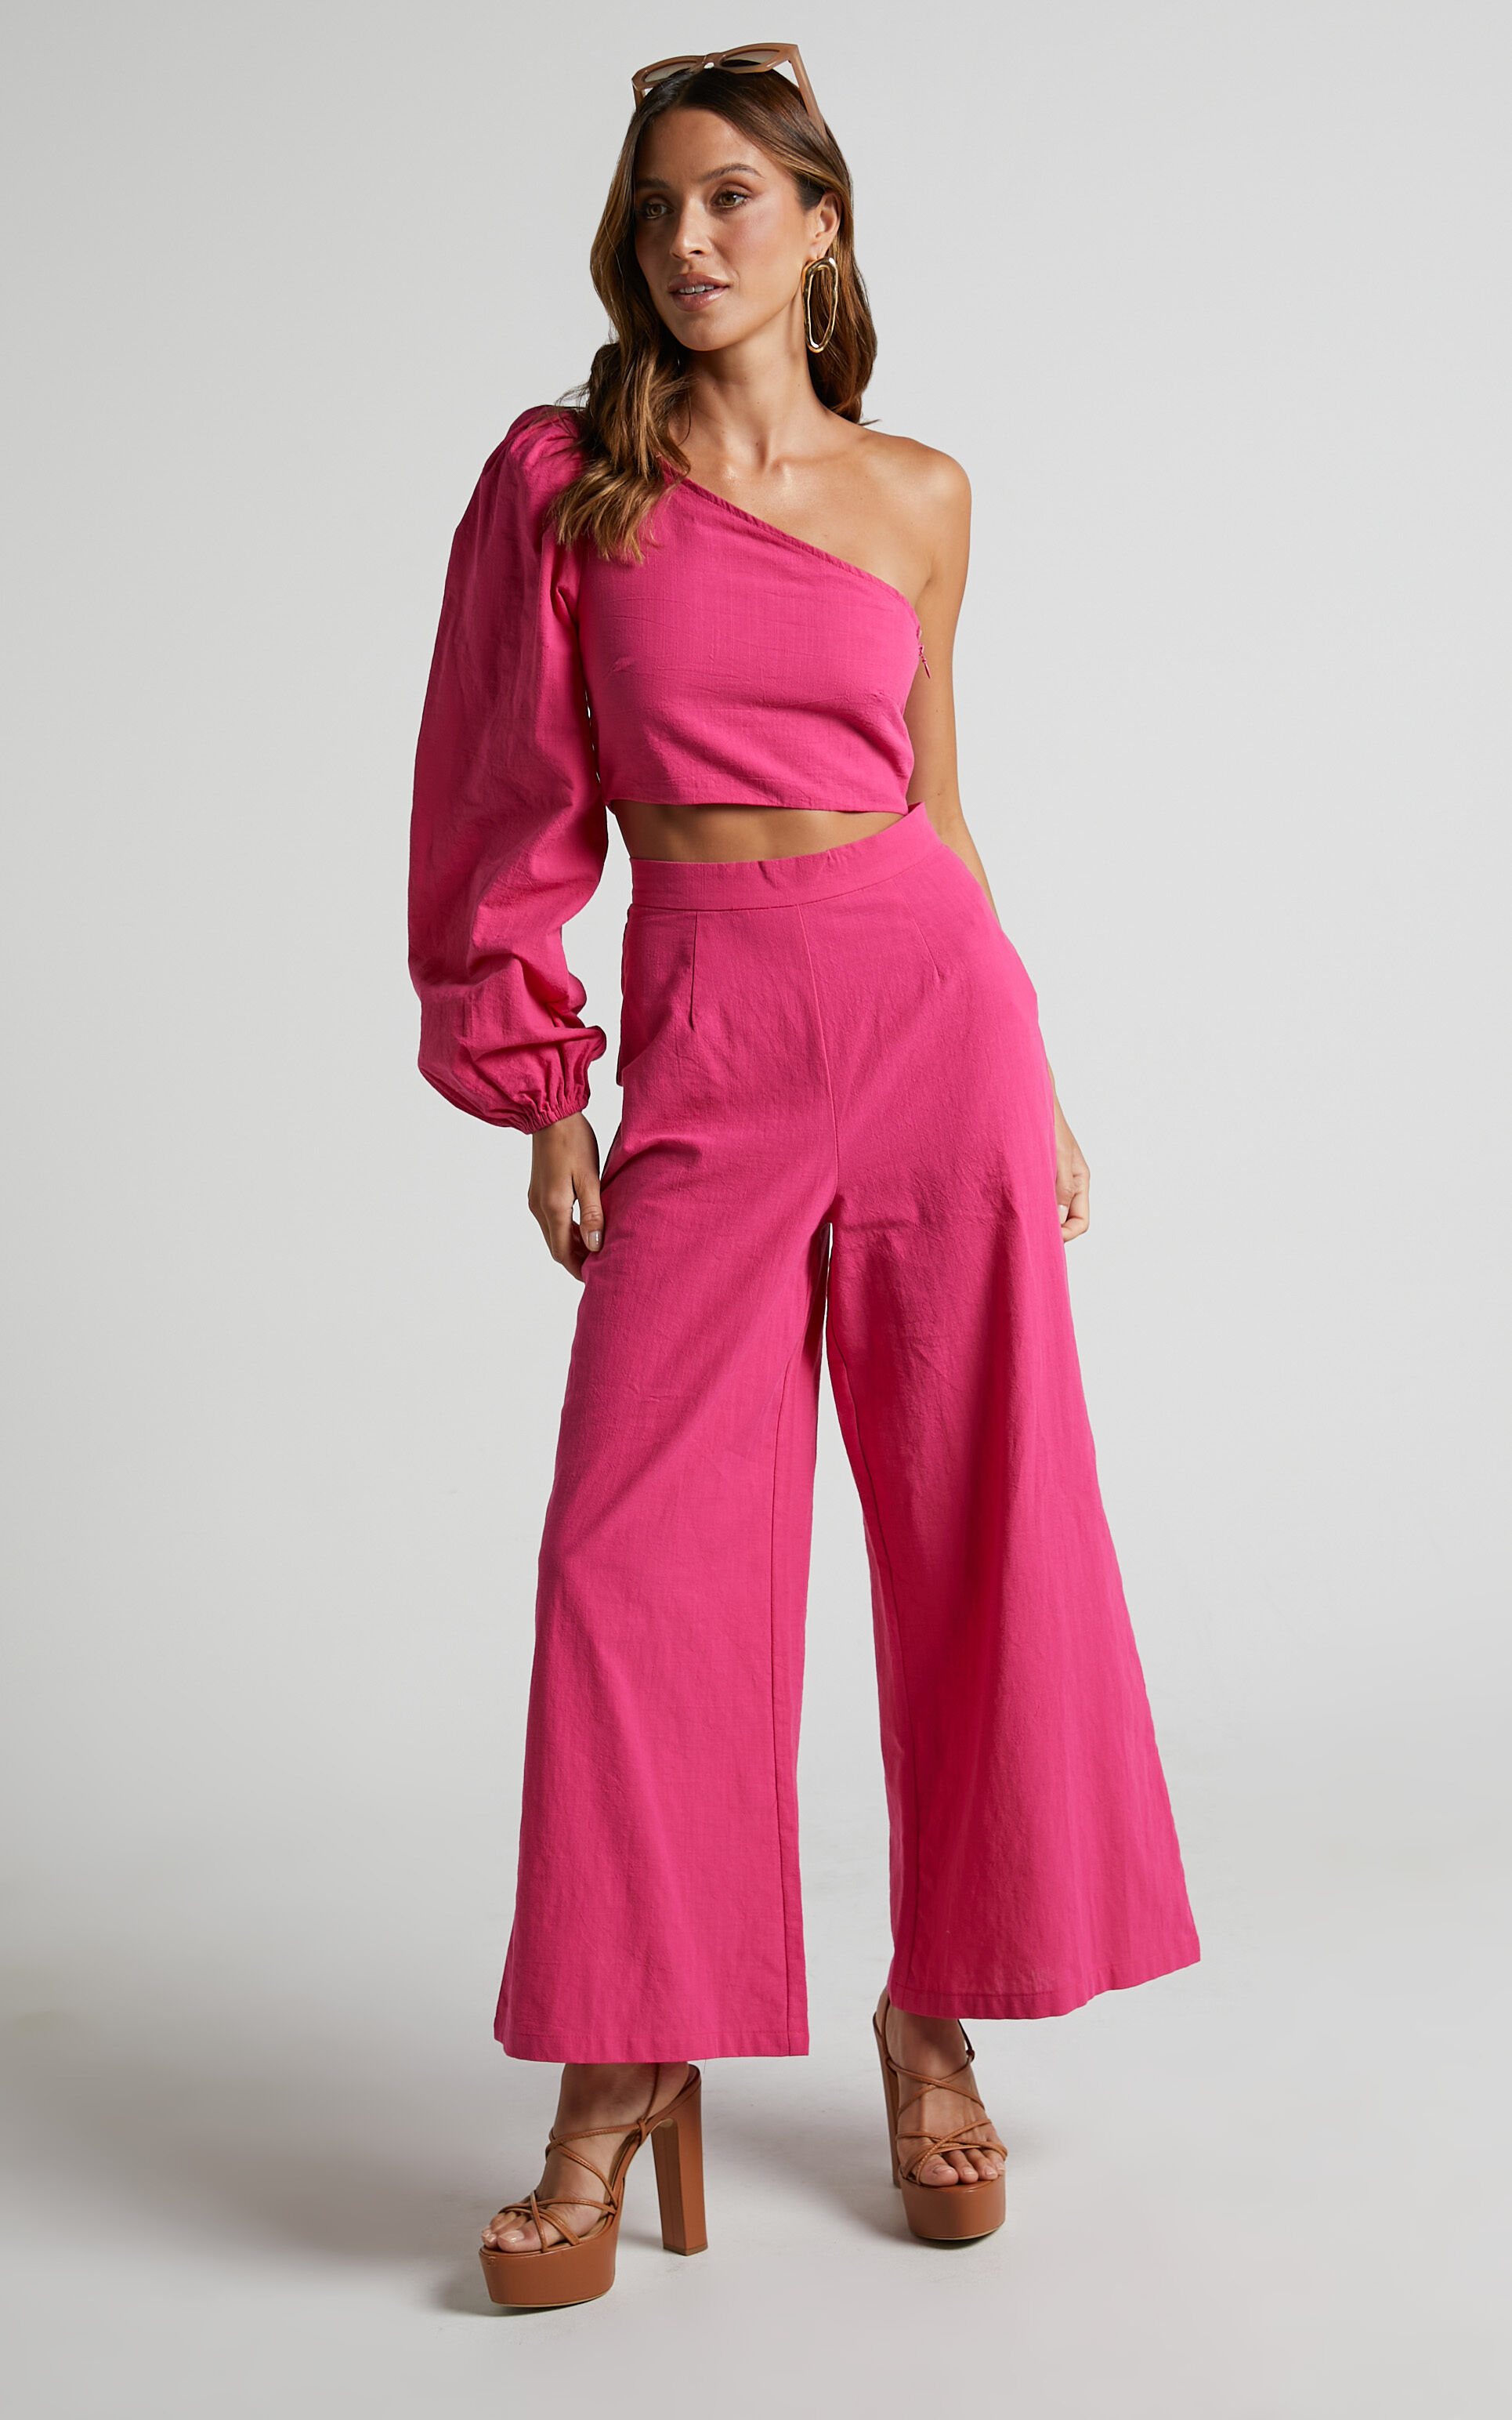 Cherira One Shoulder Top and Pant Two Piece Set in Hot Pink - 06, PNK1, super-hi-res image number null